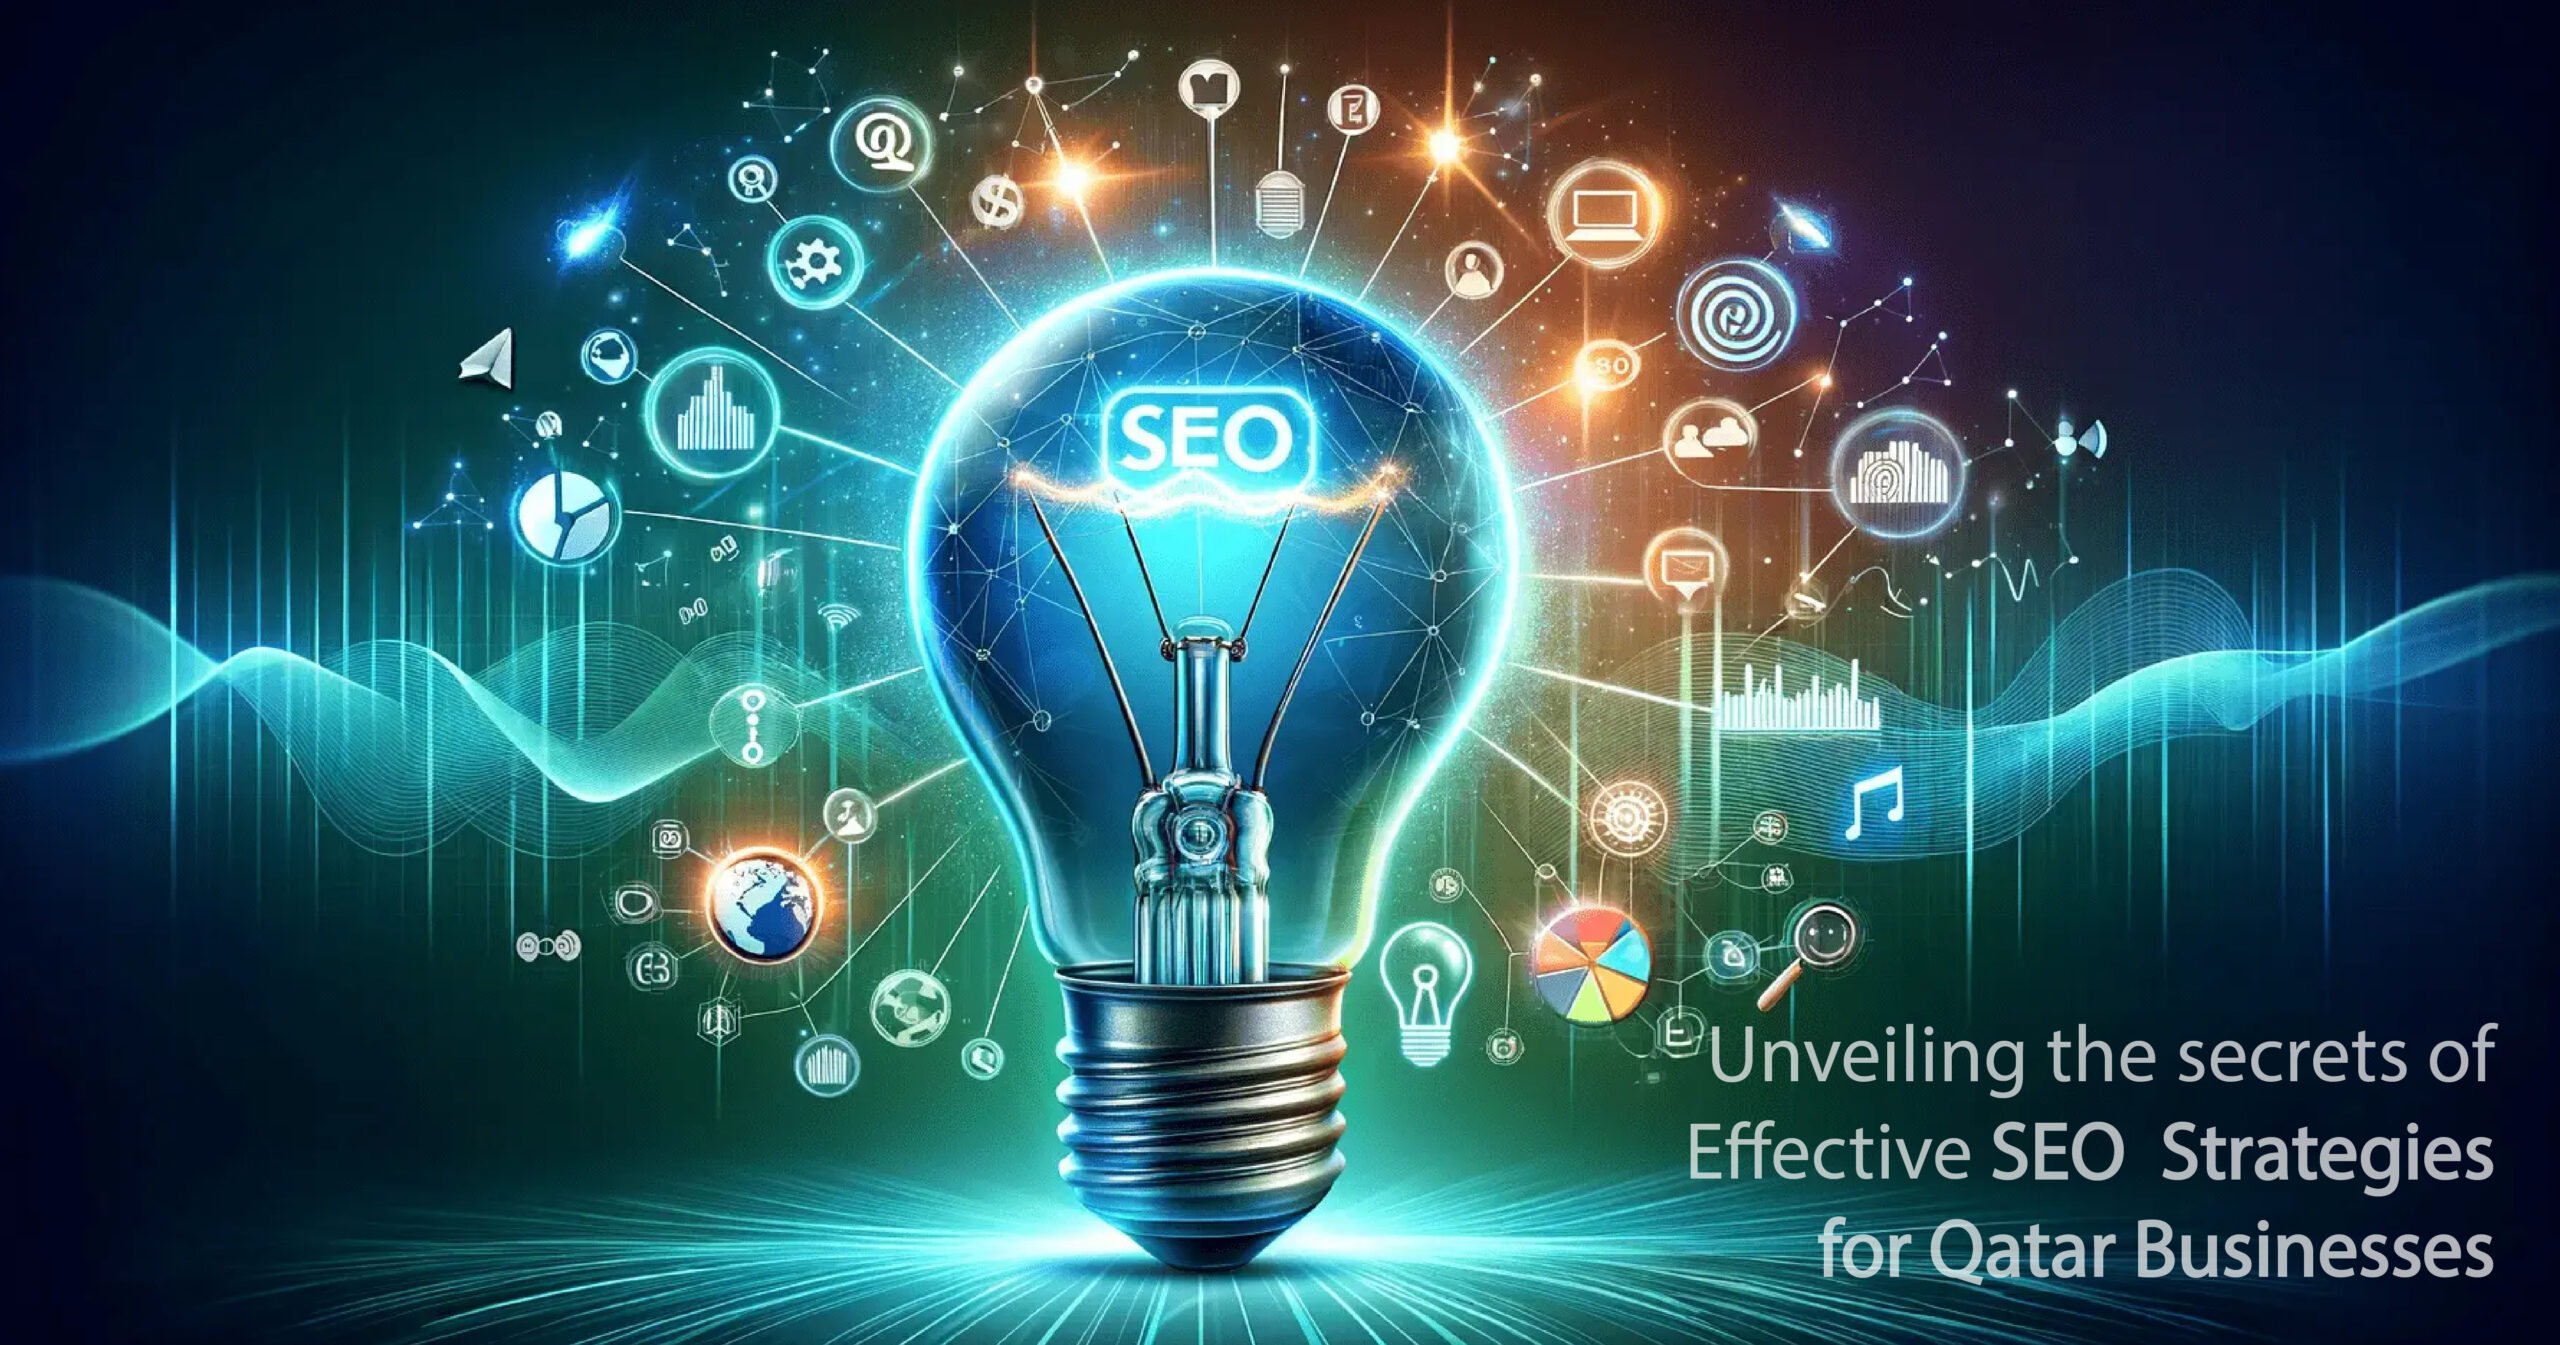 The Secrets of Effective SEO Strategies for Qatar Businesses